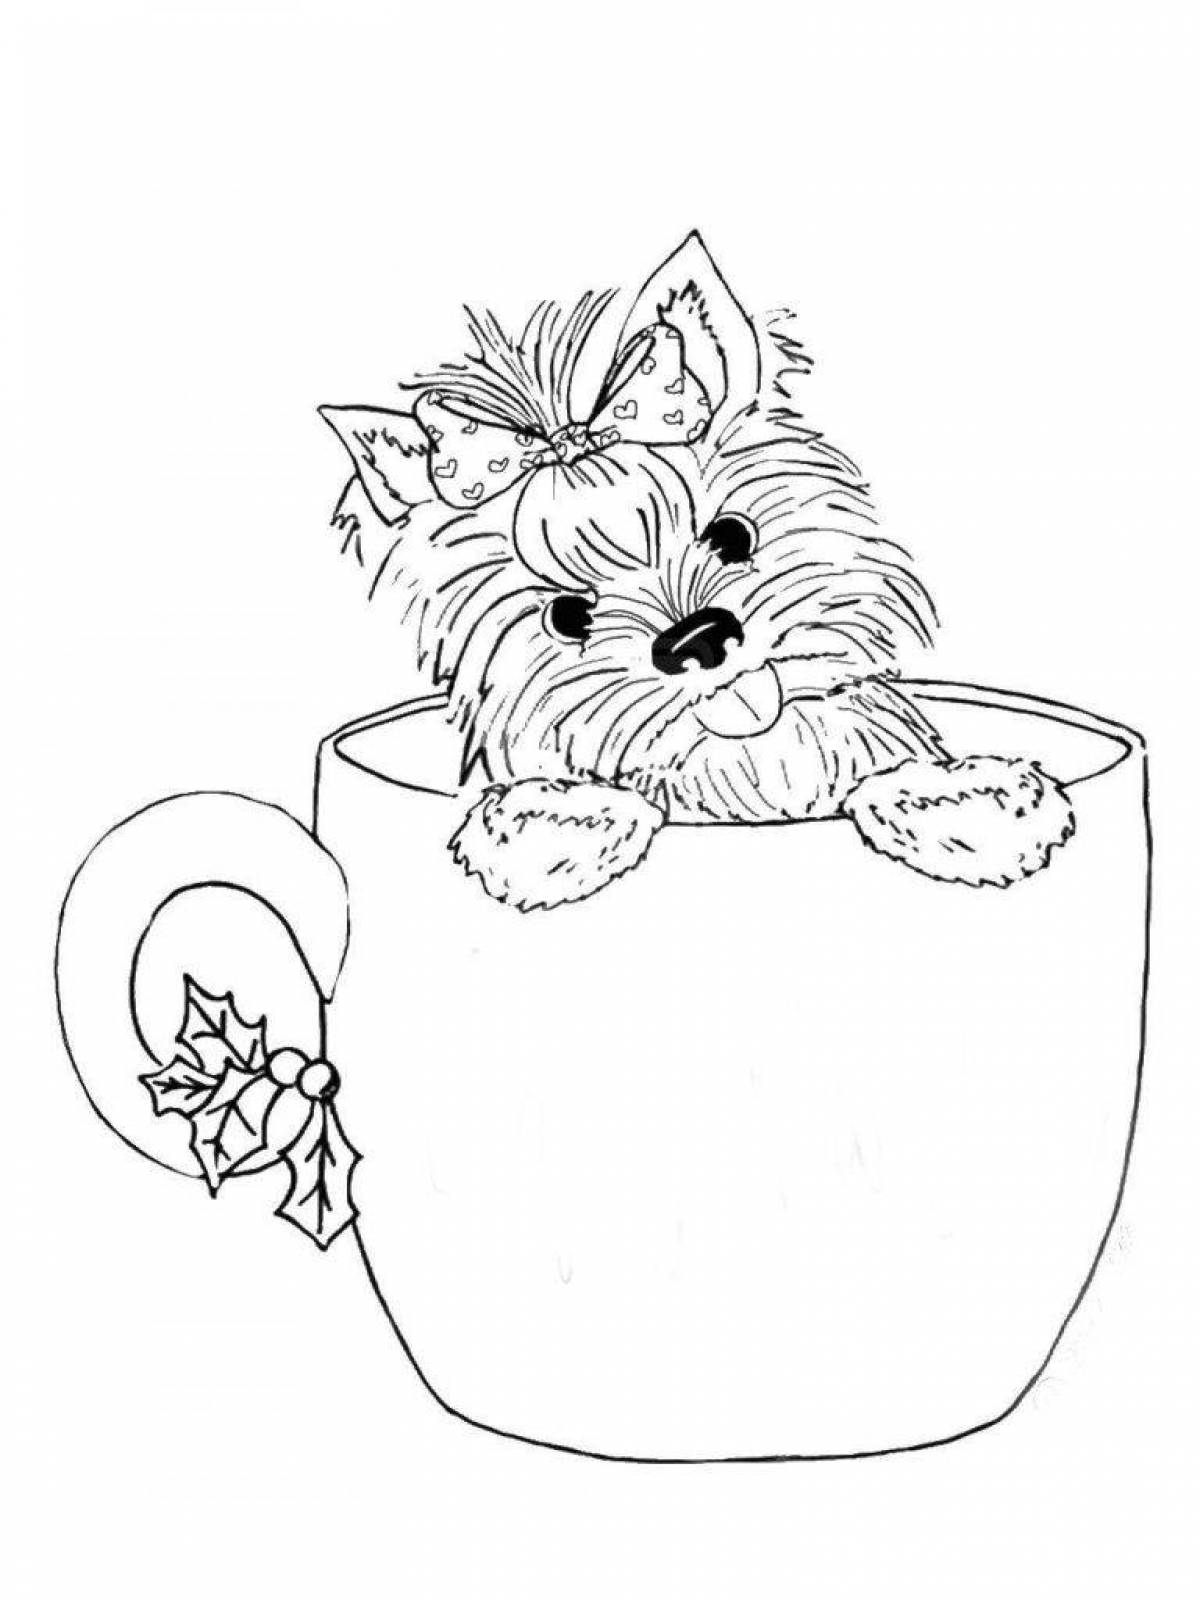 Coloring page of an attractive yorkshire terrier